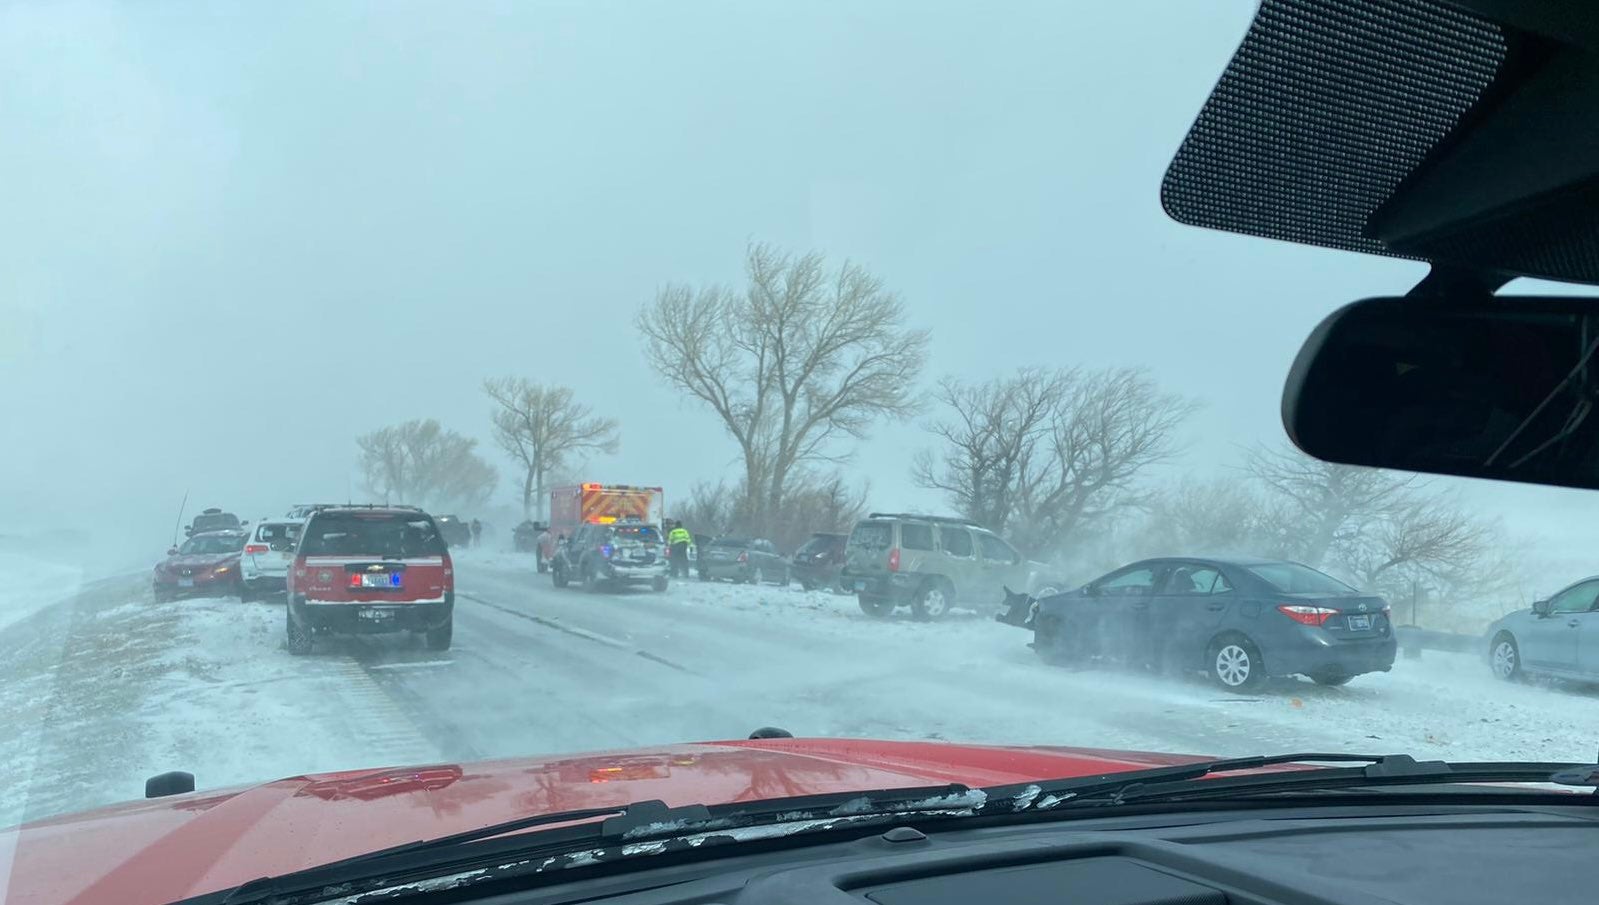 Authorities responded to a 20-car pileup in the outskirts of Reno as white-out conditions led to a storm and the closure of key highways